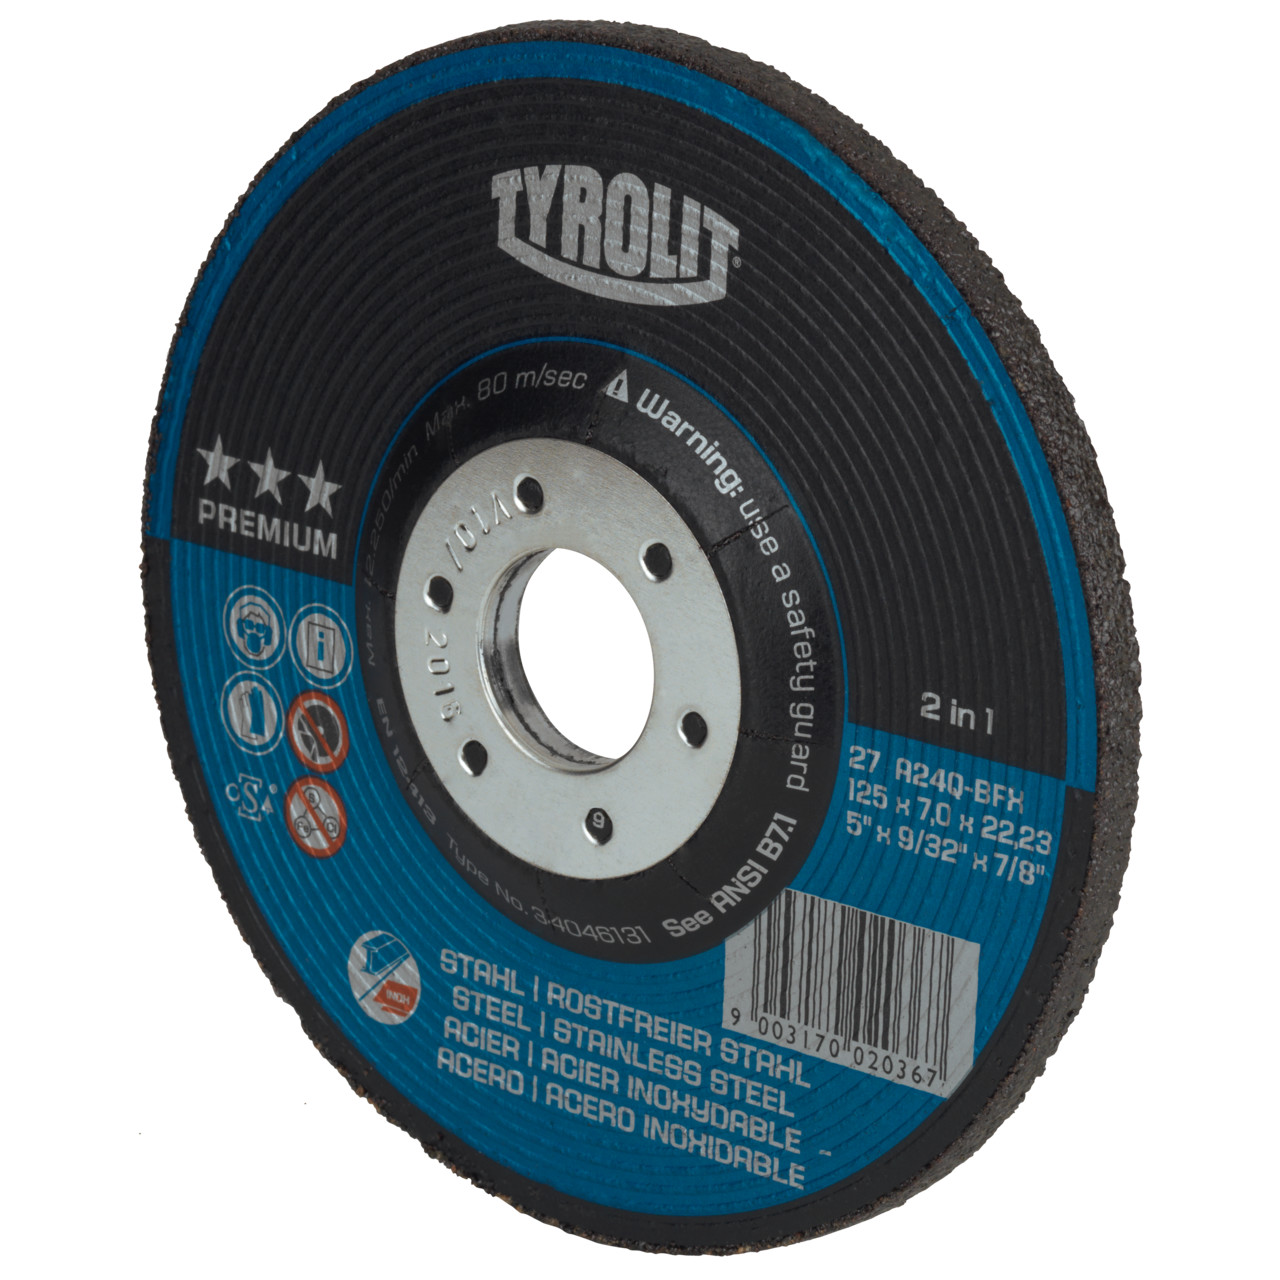 Tyrolit Roughing disc DxUxH 75x6x9.5 2in1 for steel and stainless steel, shape: 27 - offset version, Art. 5270